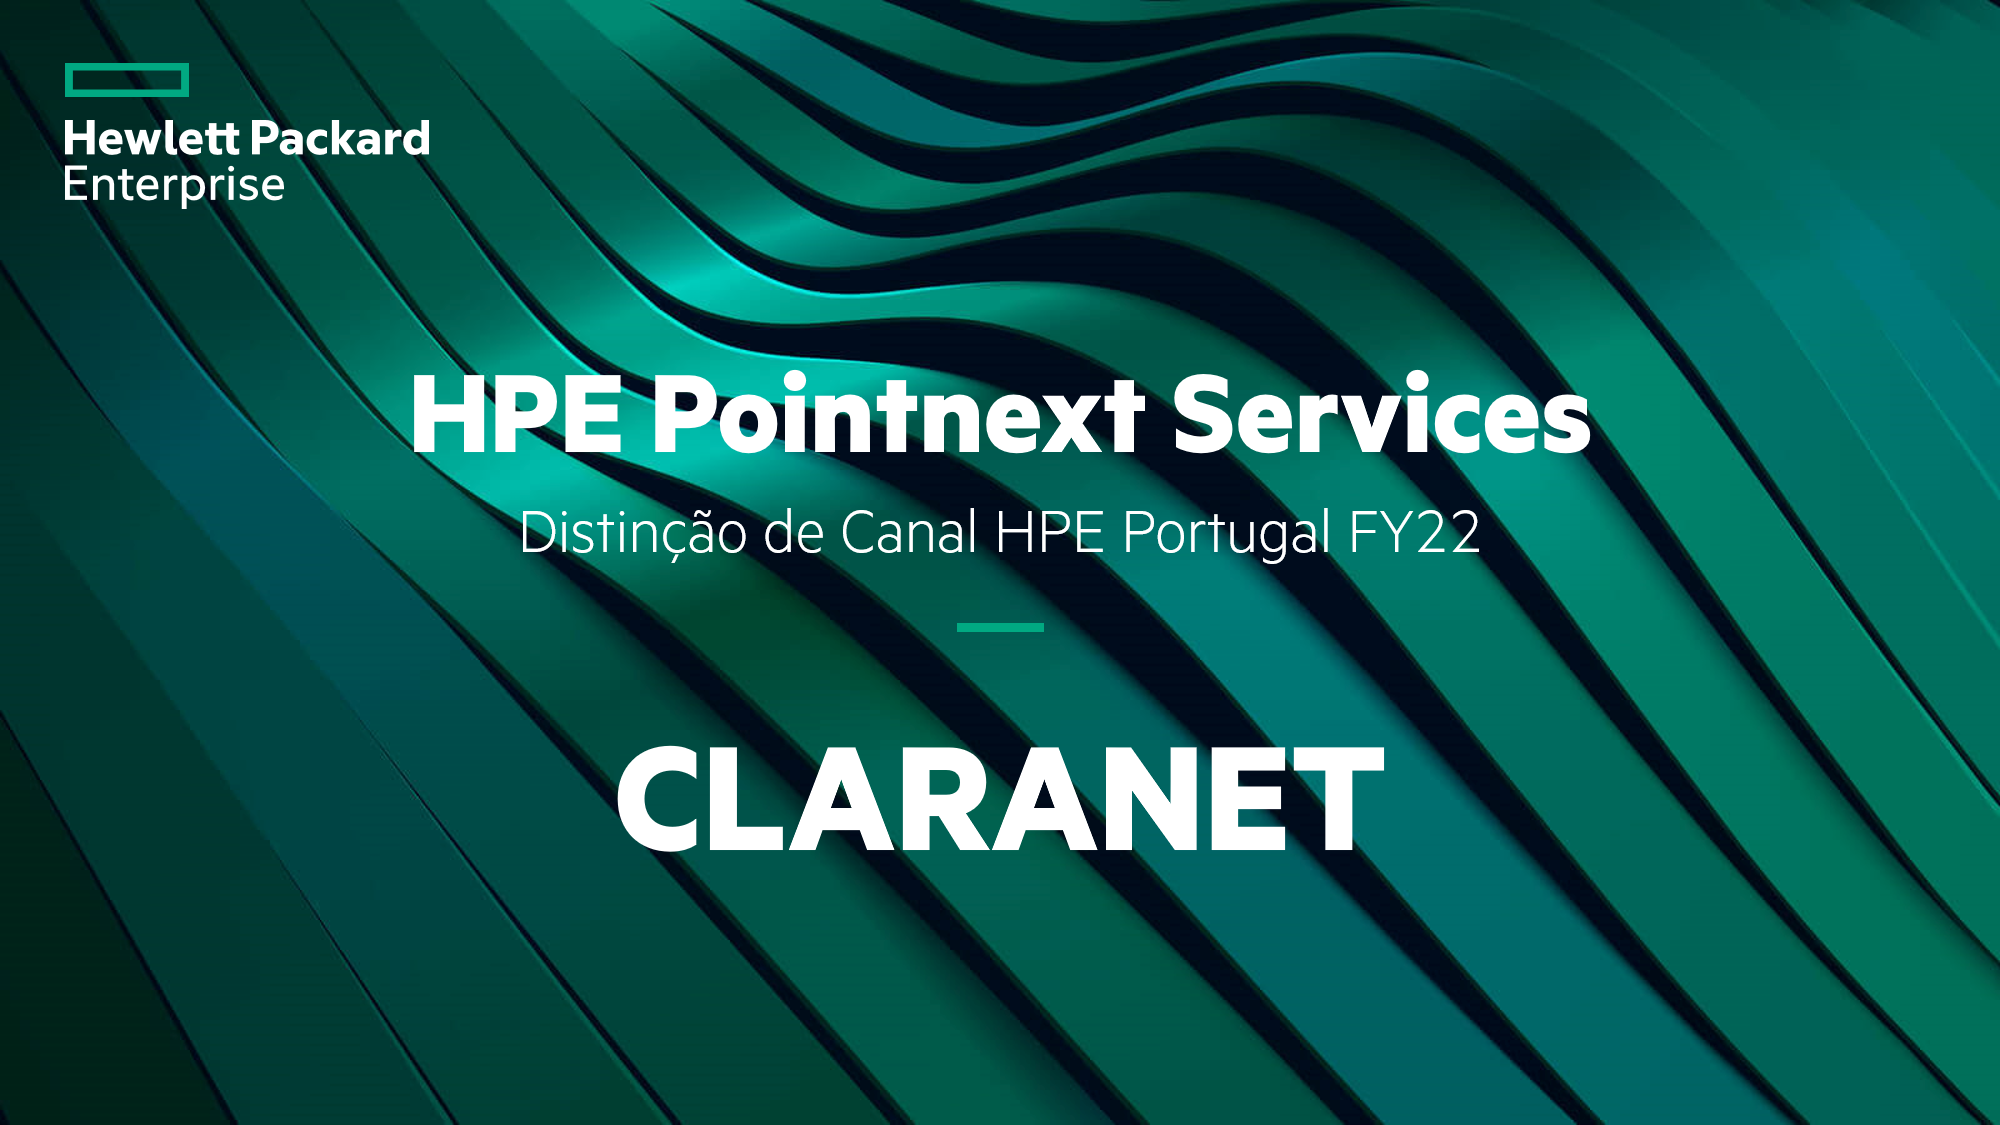 HPE Pointnext Services - Claranet